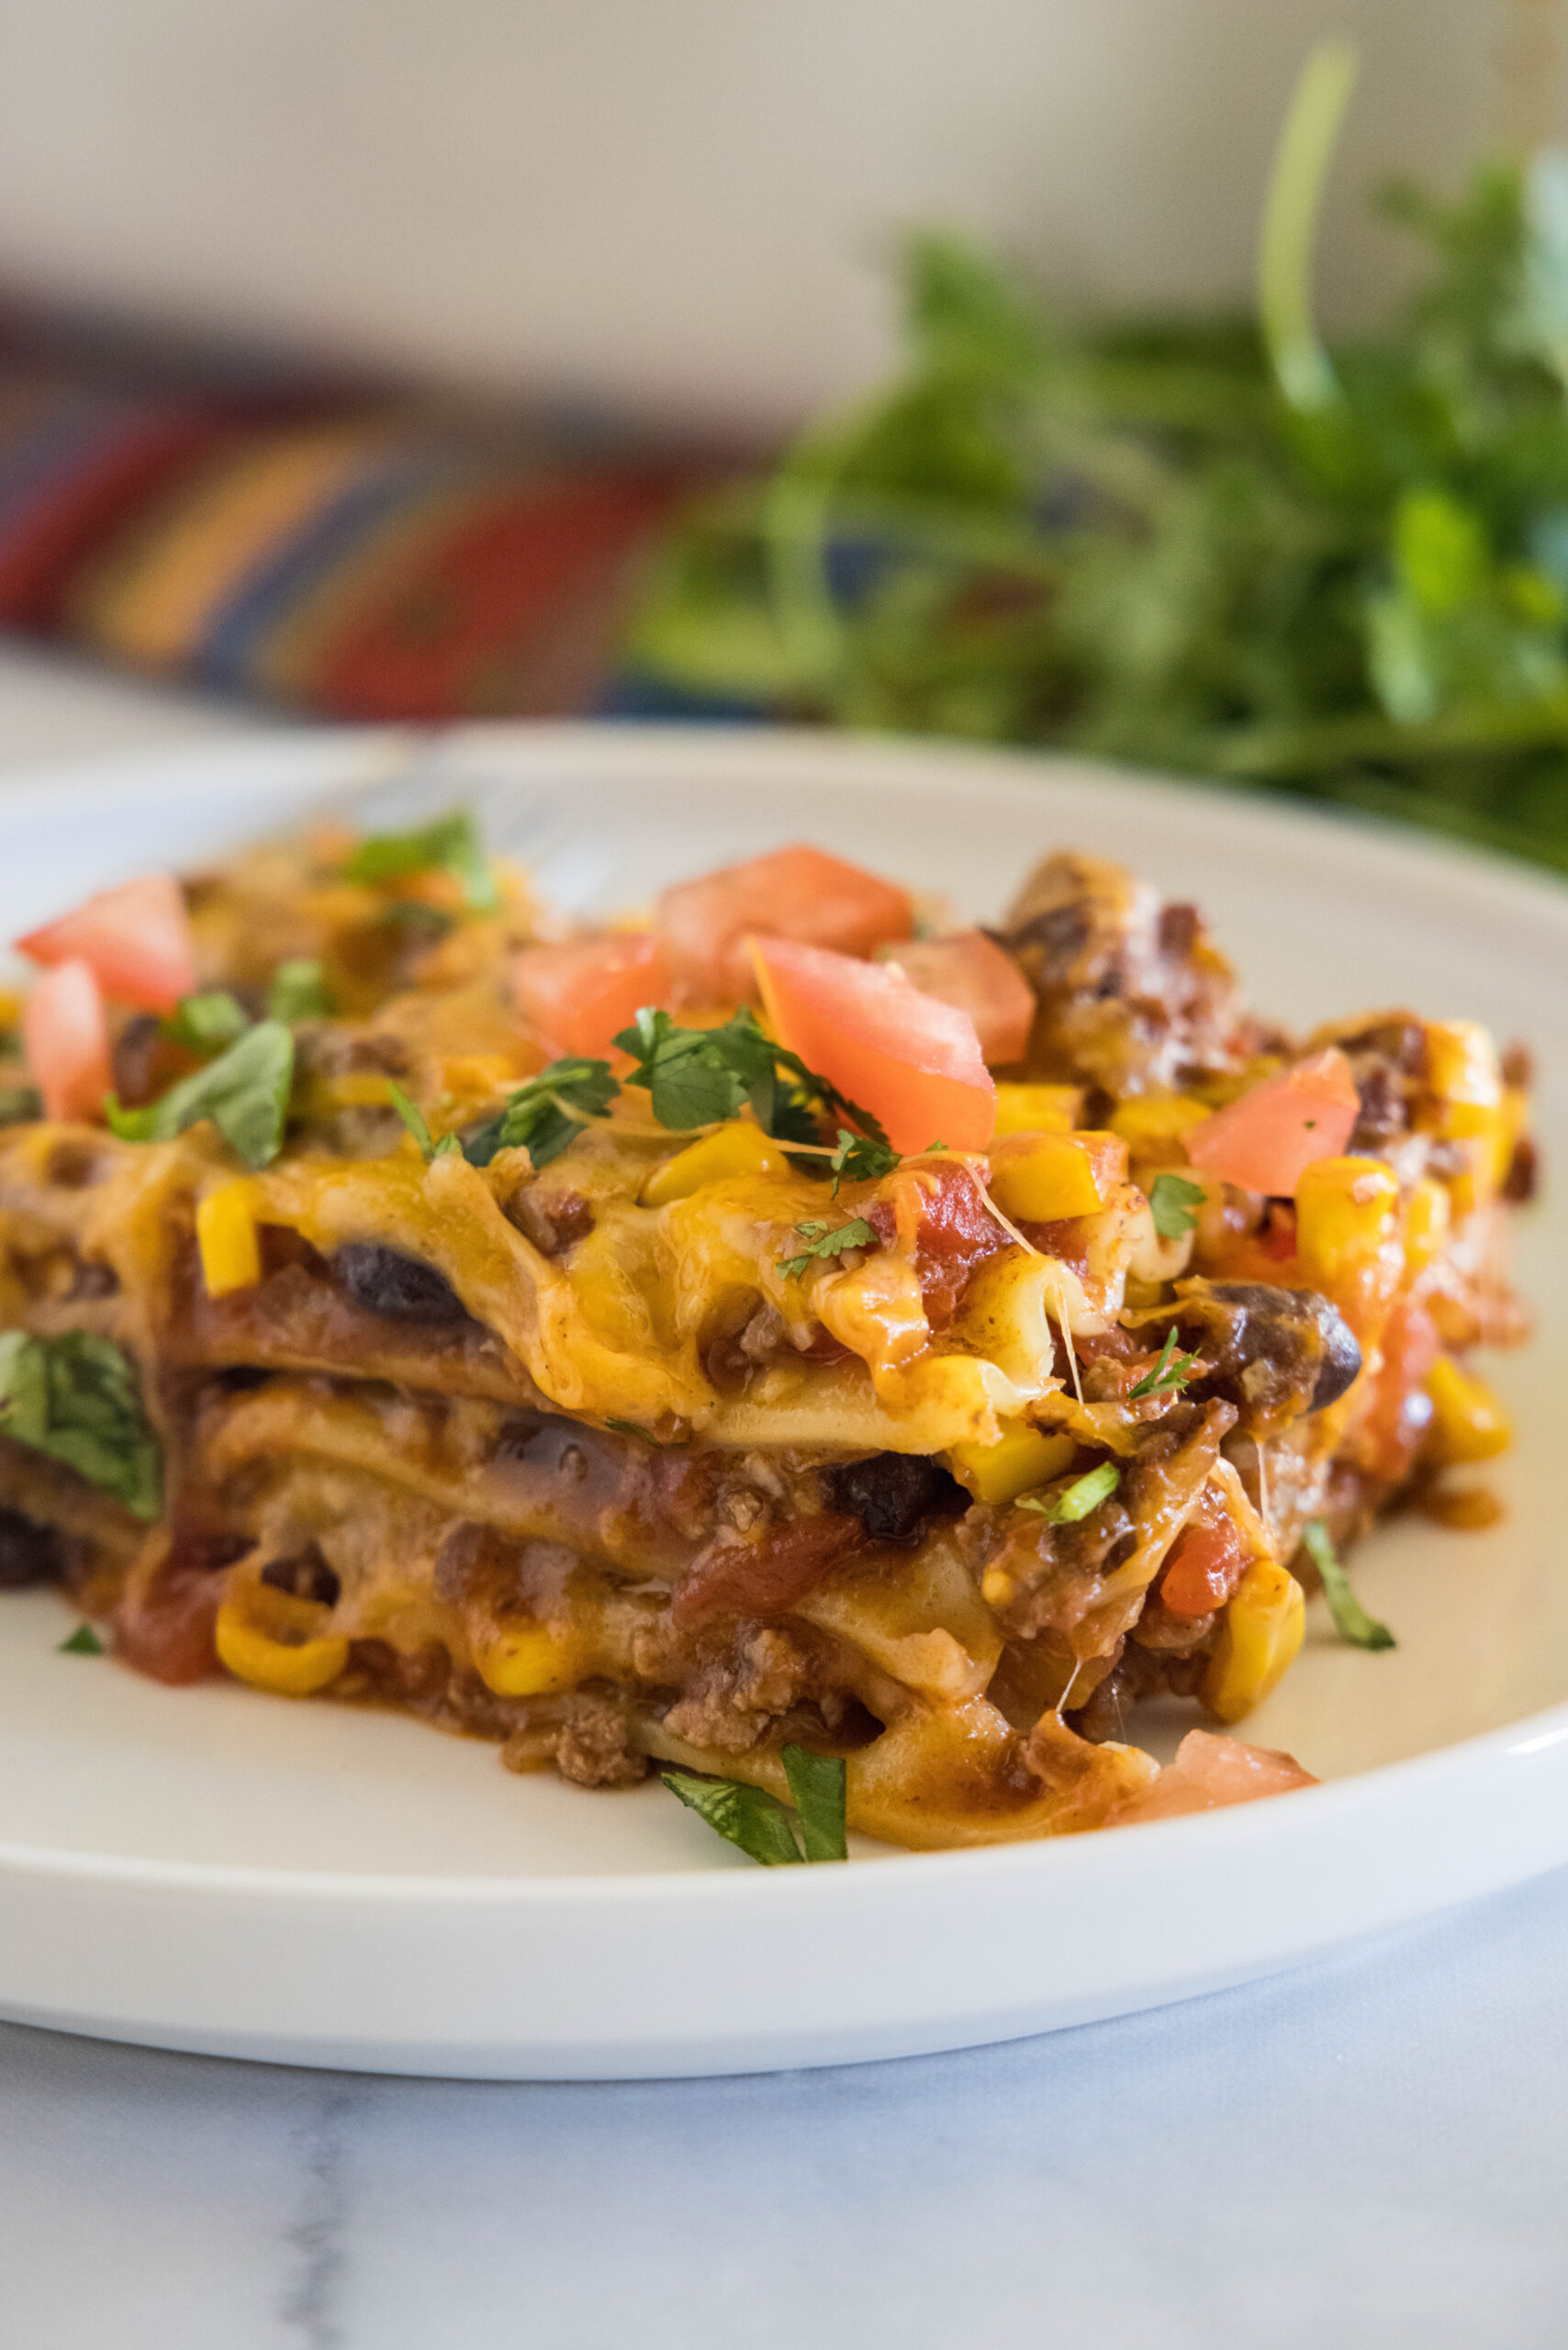 A serving of Mexican lasagna on a white plate.